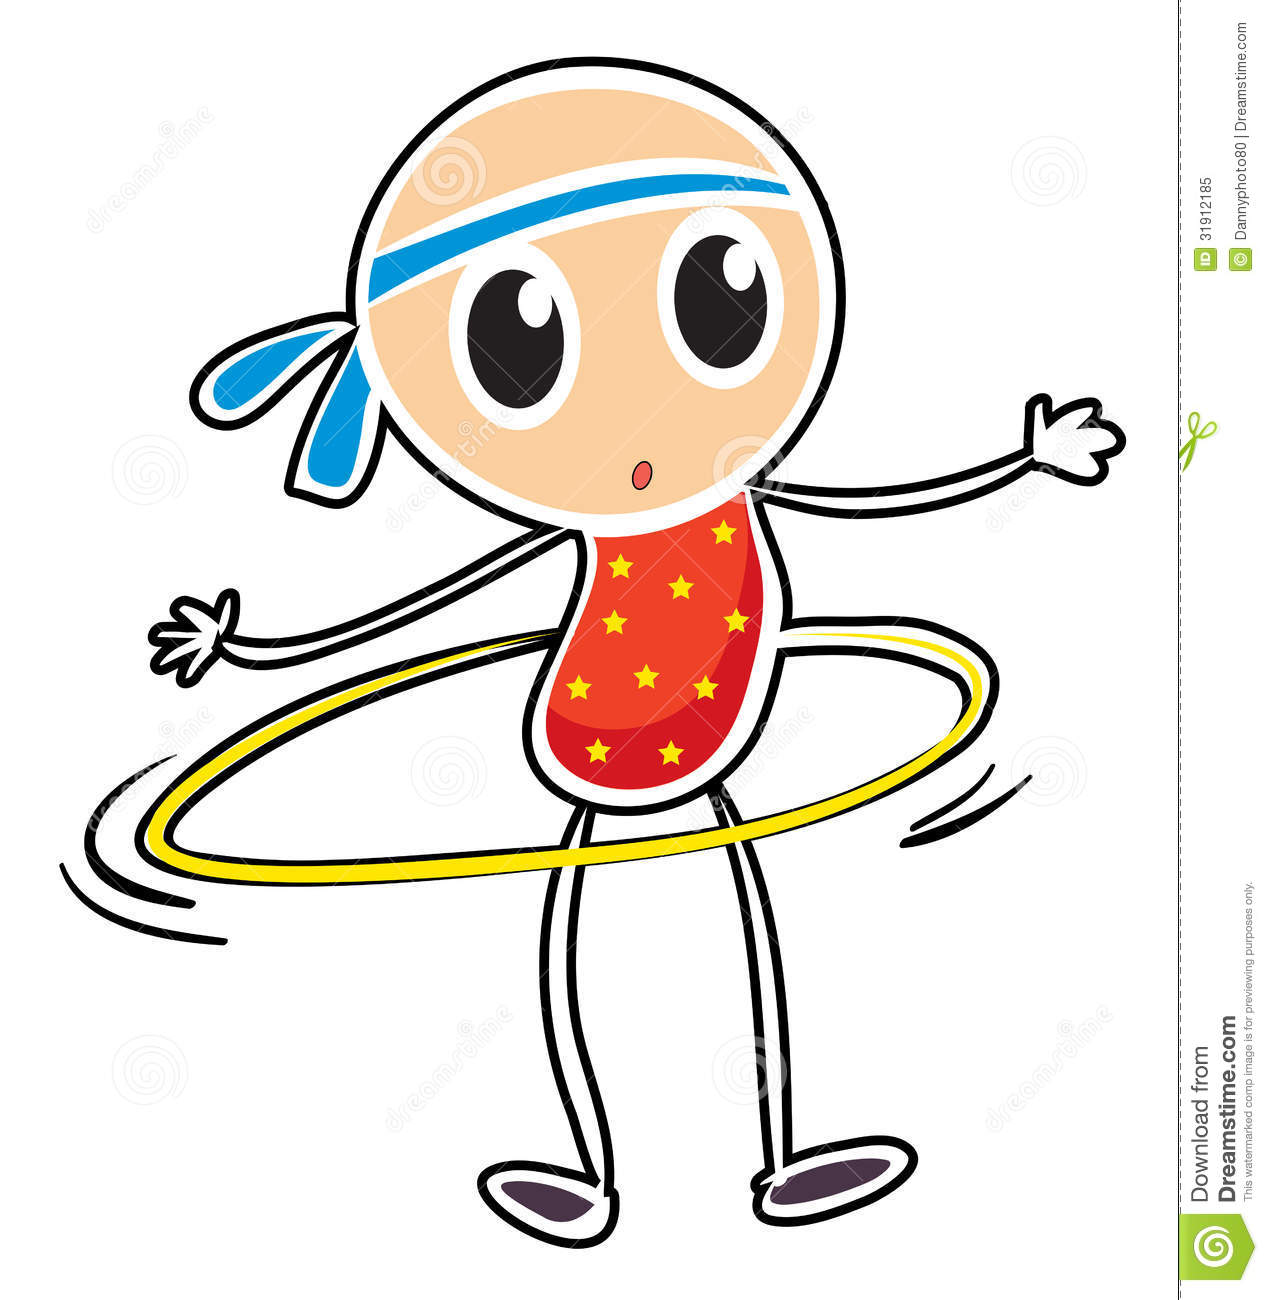 Sketch Of A Child Playing Hula Hoop Royalty Free Stock Photo   Image